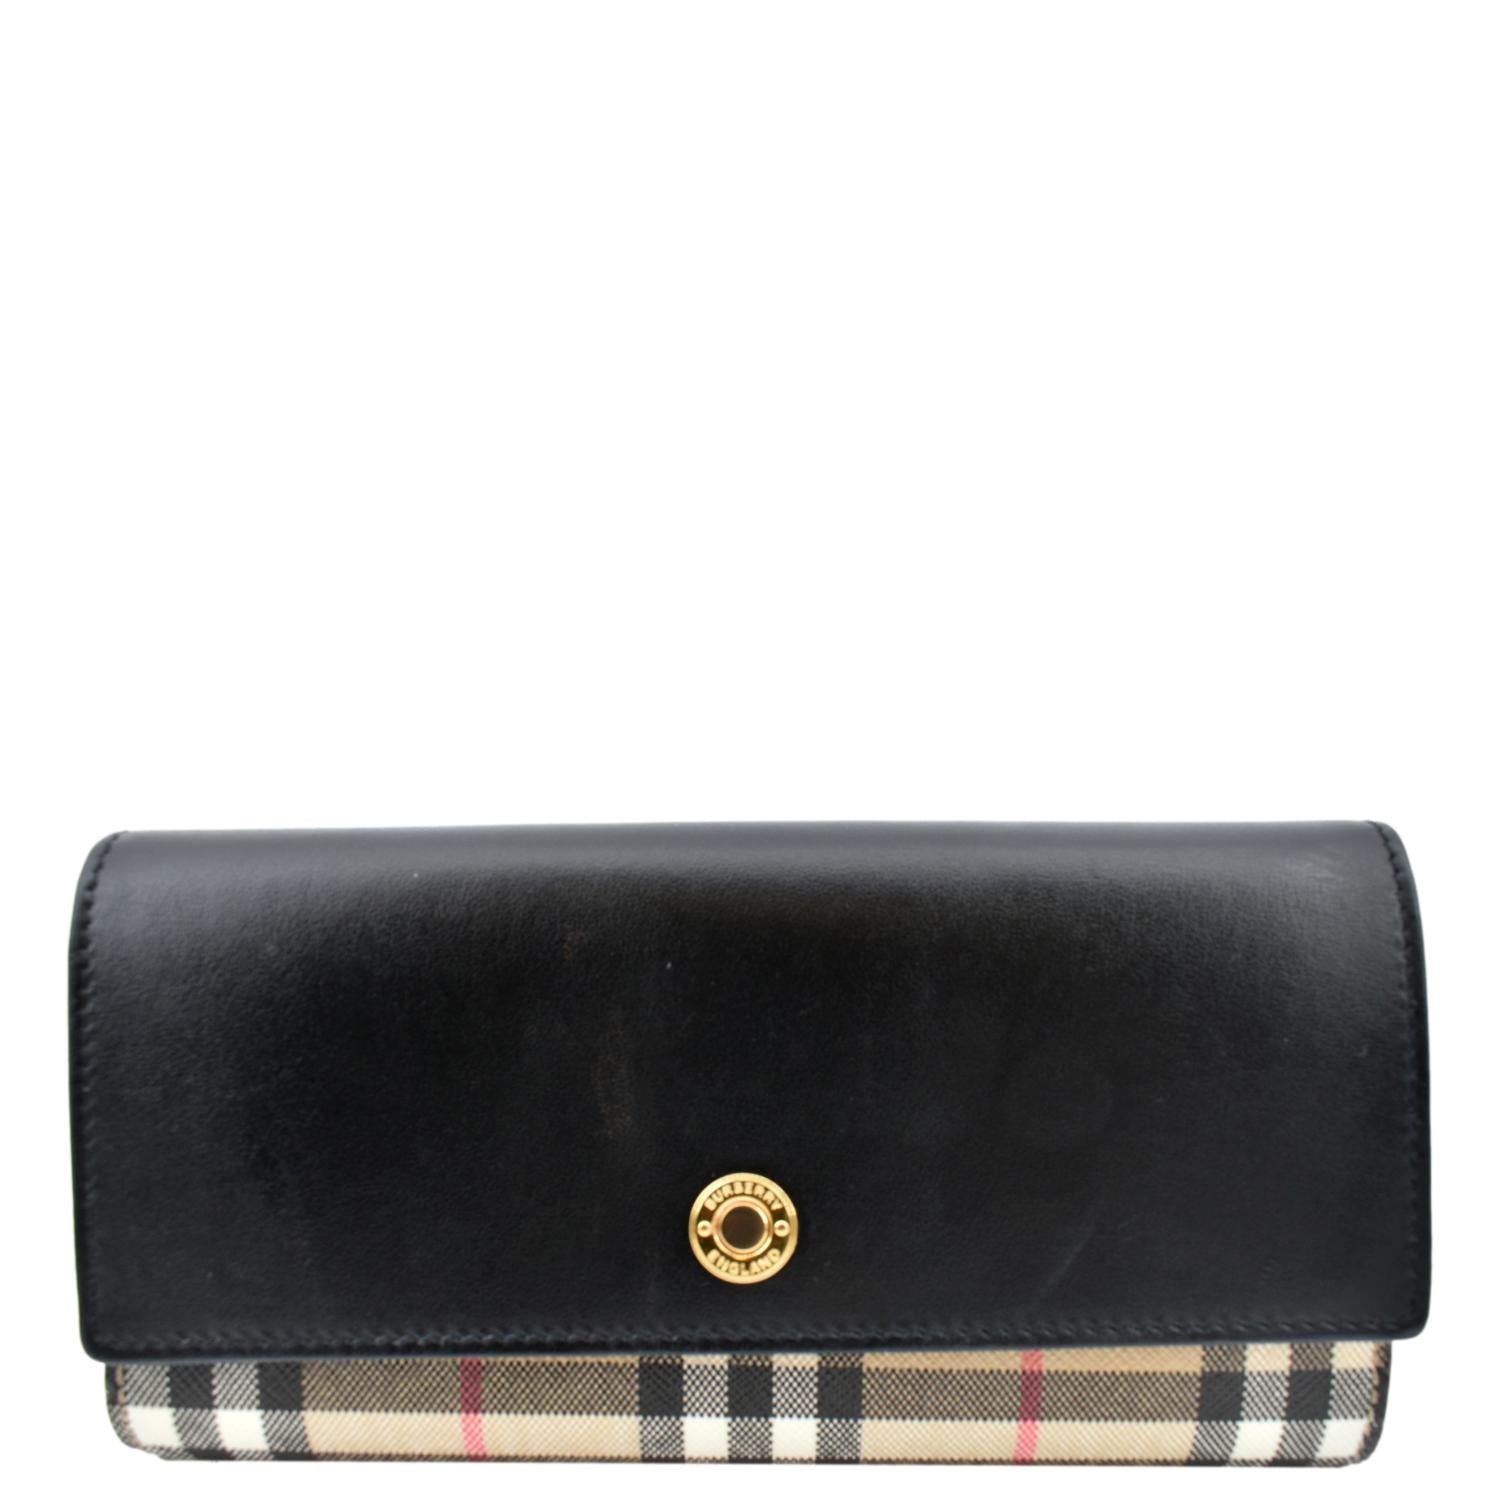 Burberry Continental Leather Wallet - Black